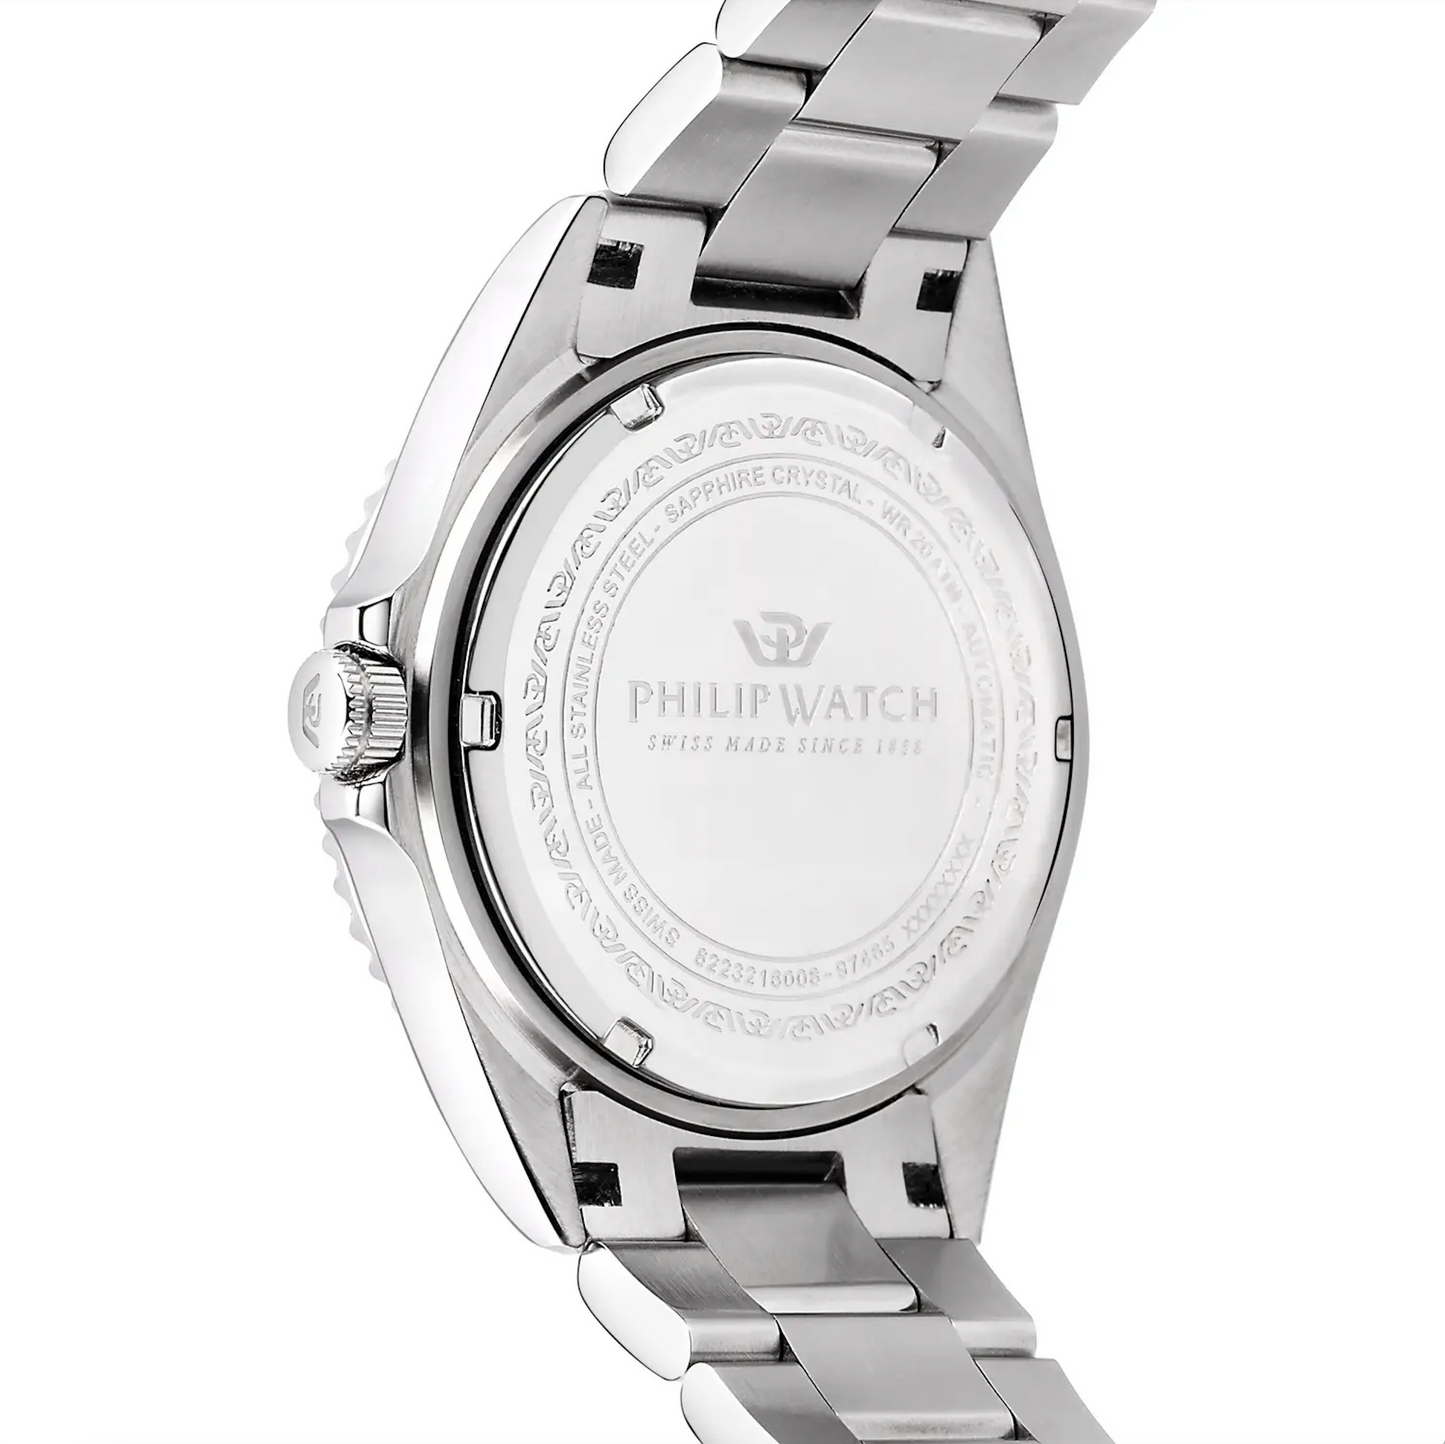 MONTRE HOMME PHILIP WATCH CARIBE DIVING R8223216008